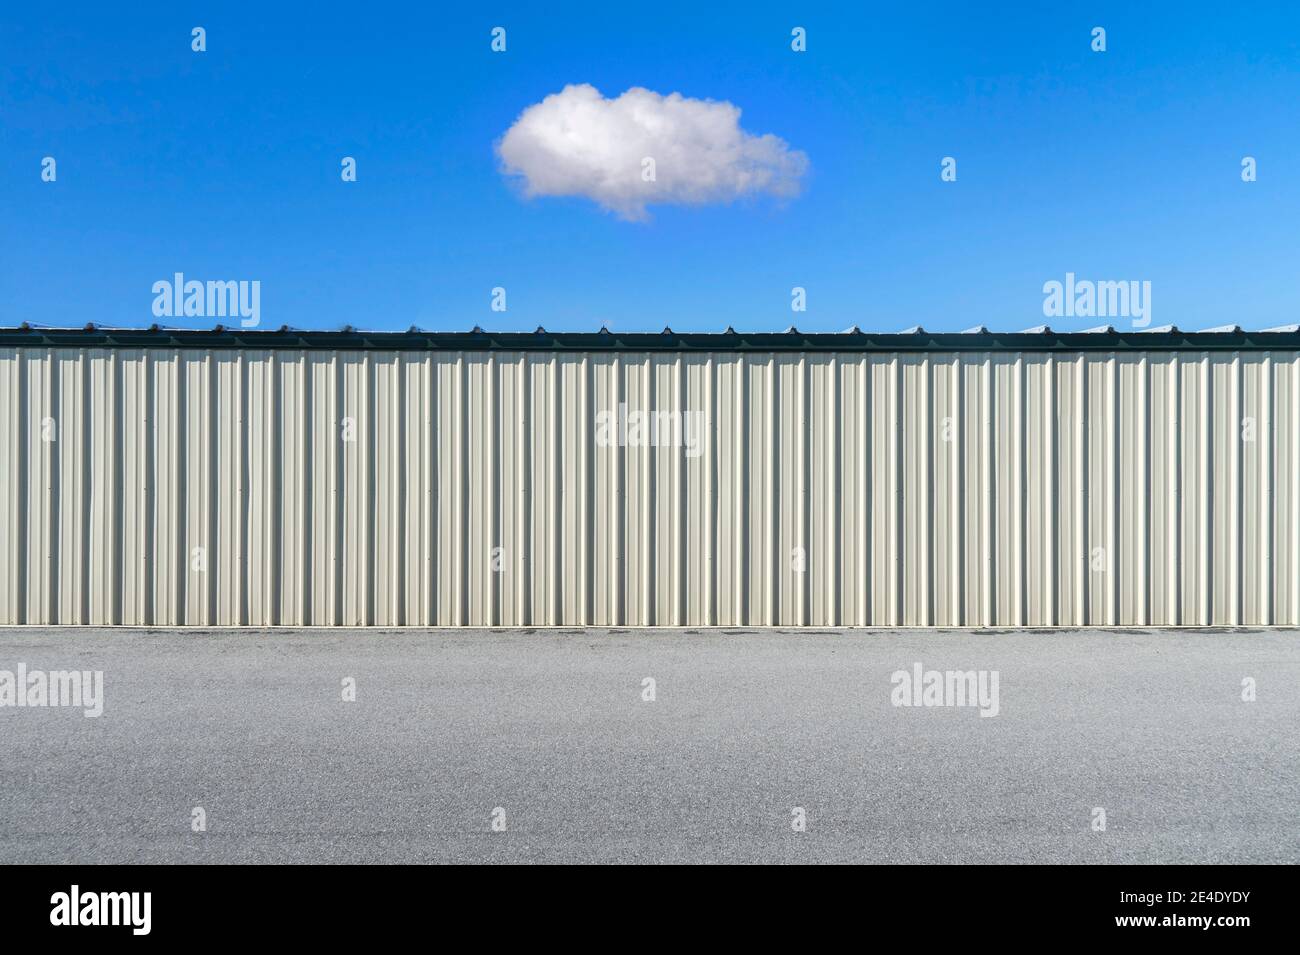 Simple minimalistic corrugated metal exterior wall with single cloud in sky. Stock Photo